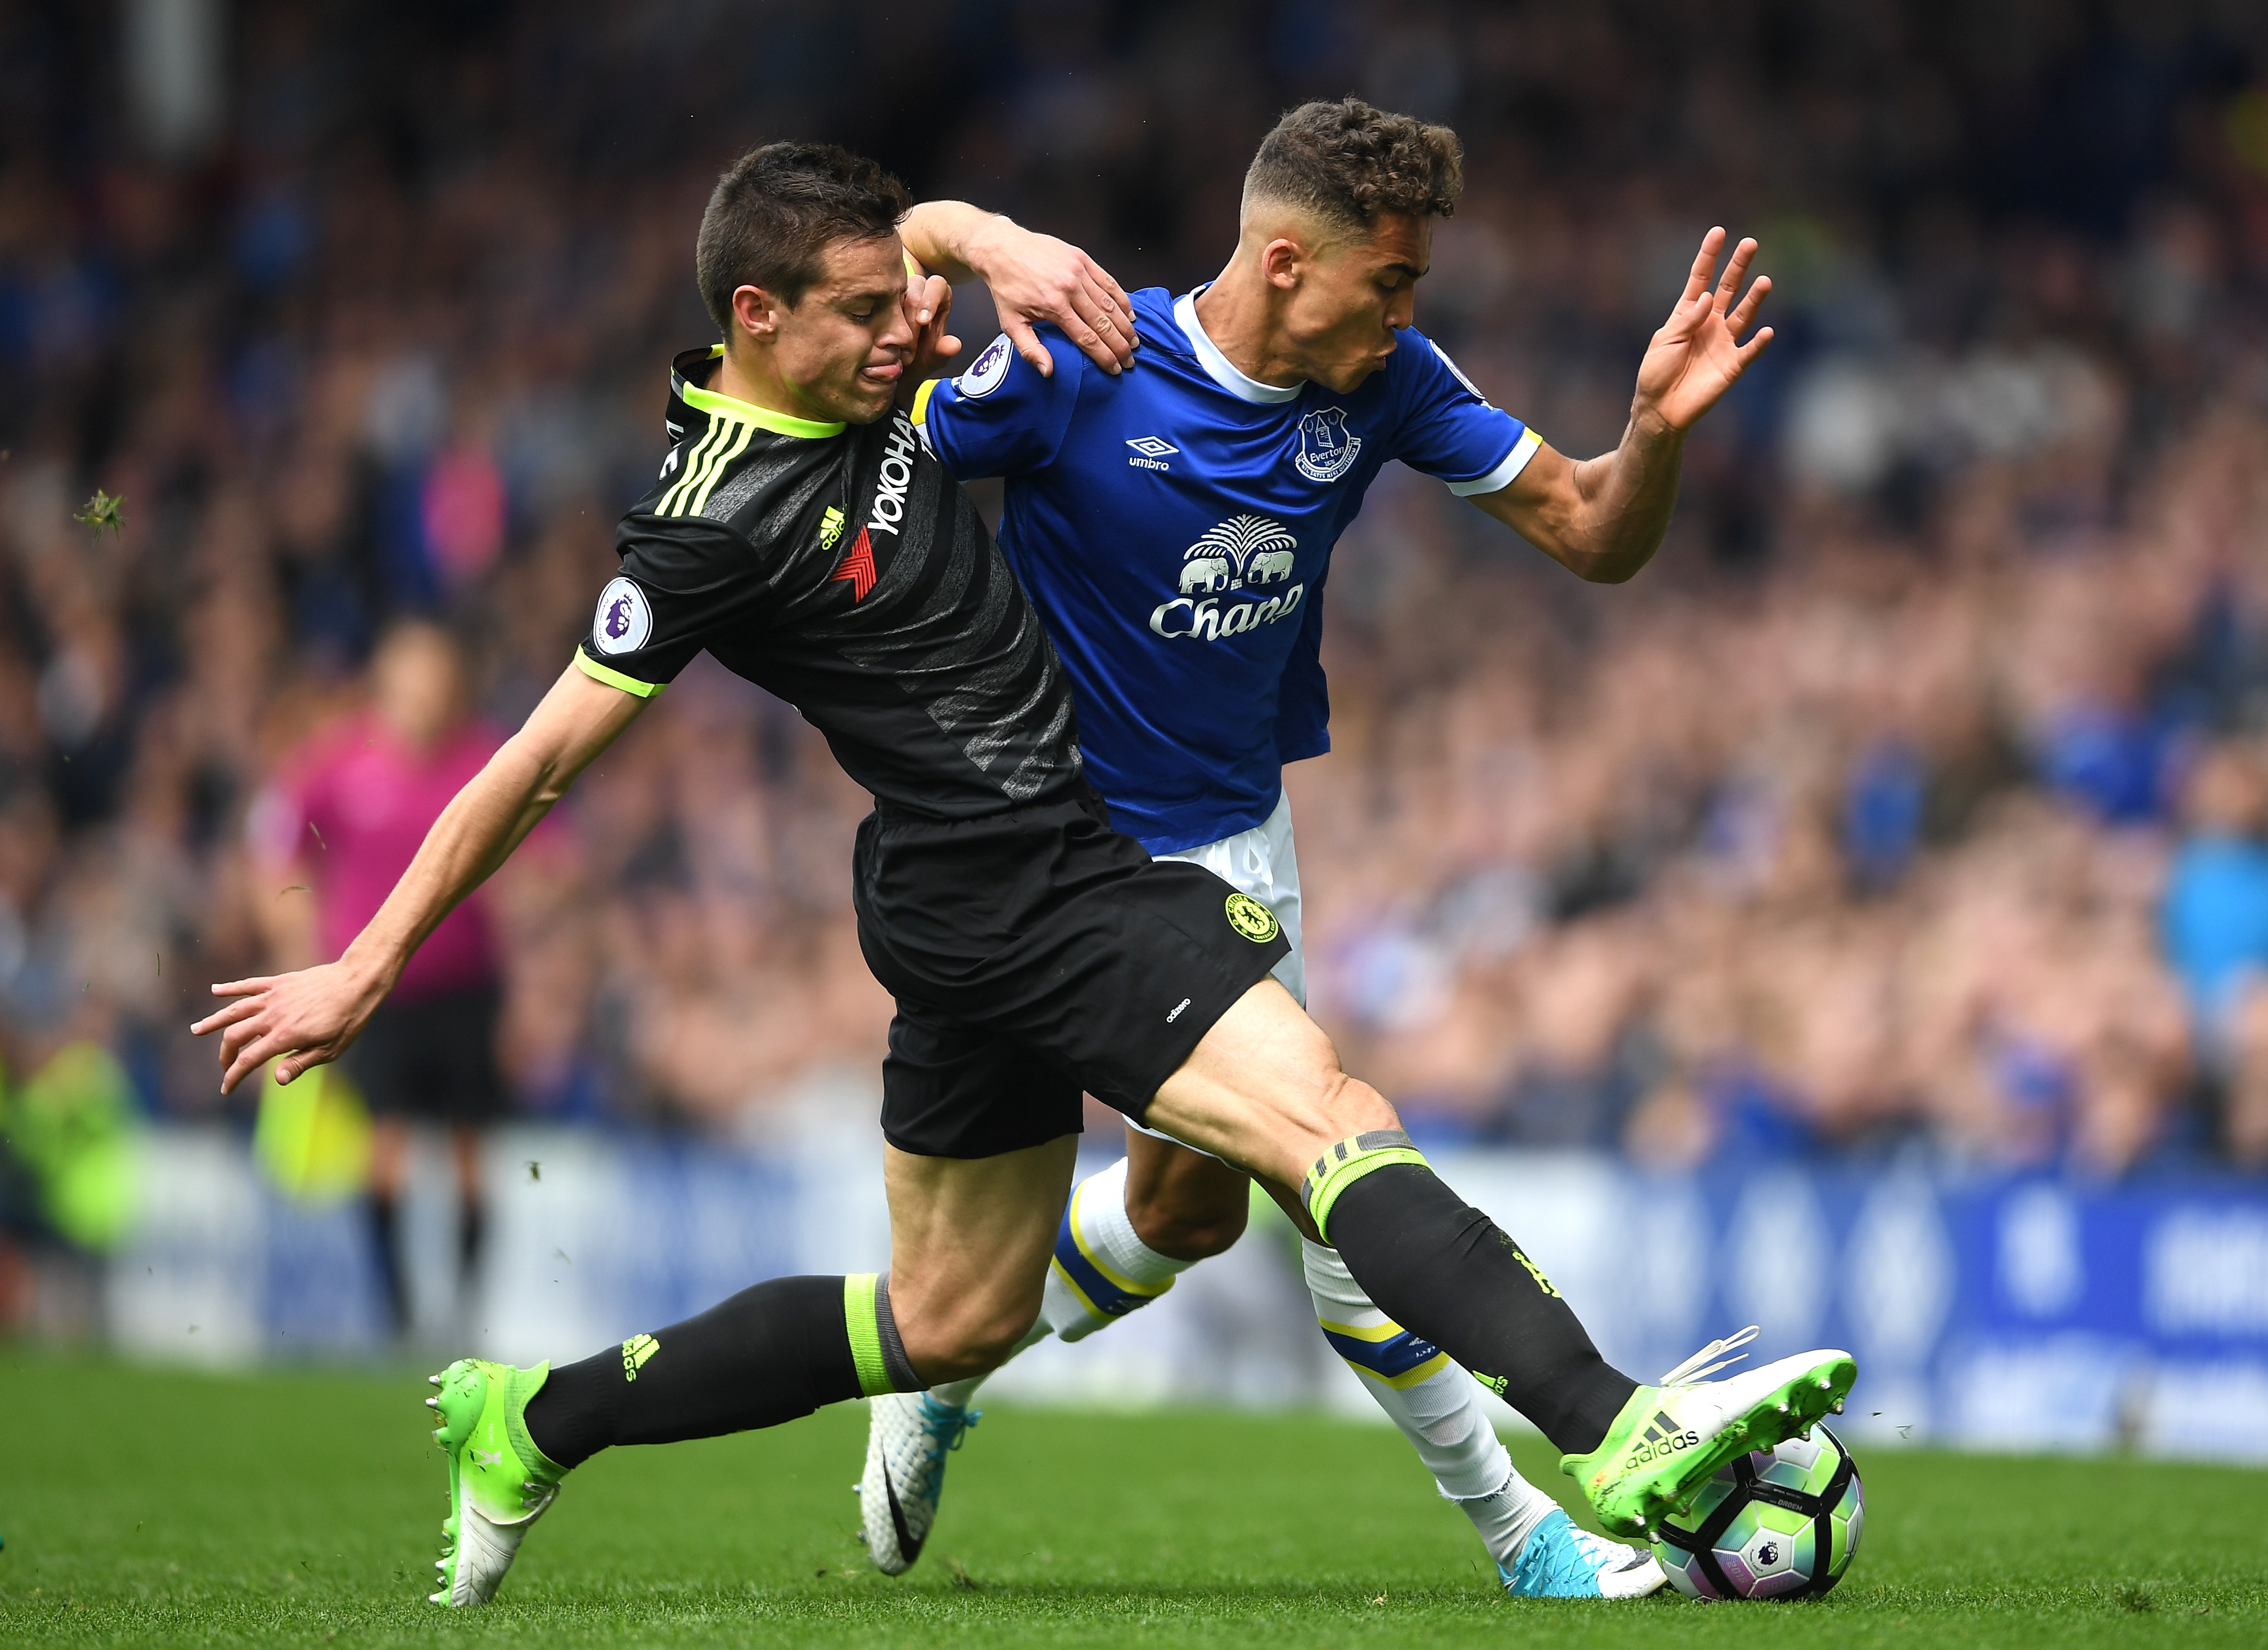 LIVERPOOL, ENGLAND - APRIL 30:  Cesar Azpilicueta of Chelsea and Dominic Calvert-Lewin of Everton battle for possession during the Premier League match between Everton and Chelsea at Goodison Park on April 30, 2017 in Liverpool, England.  (Photo by Laurence Griffiths/Getty Images)